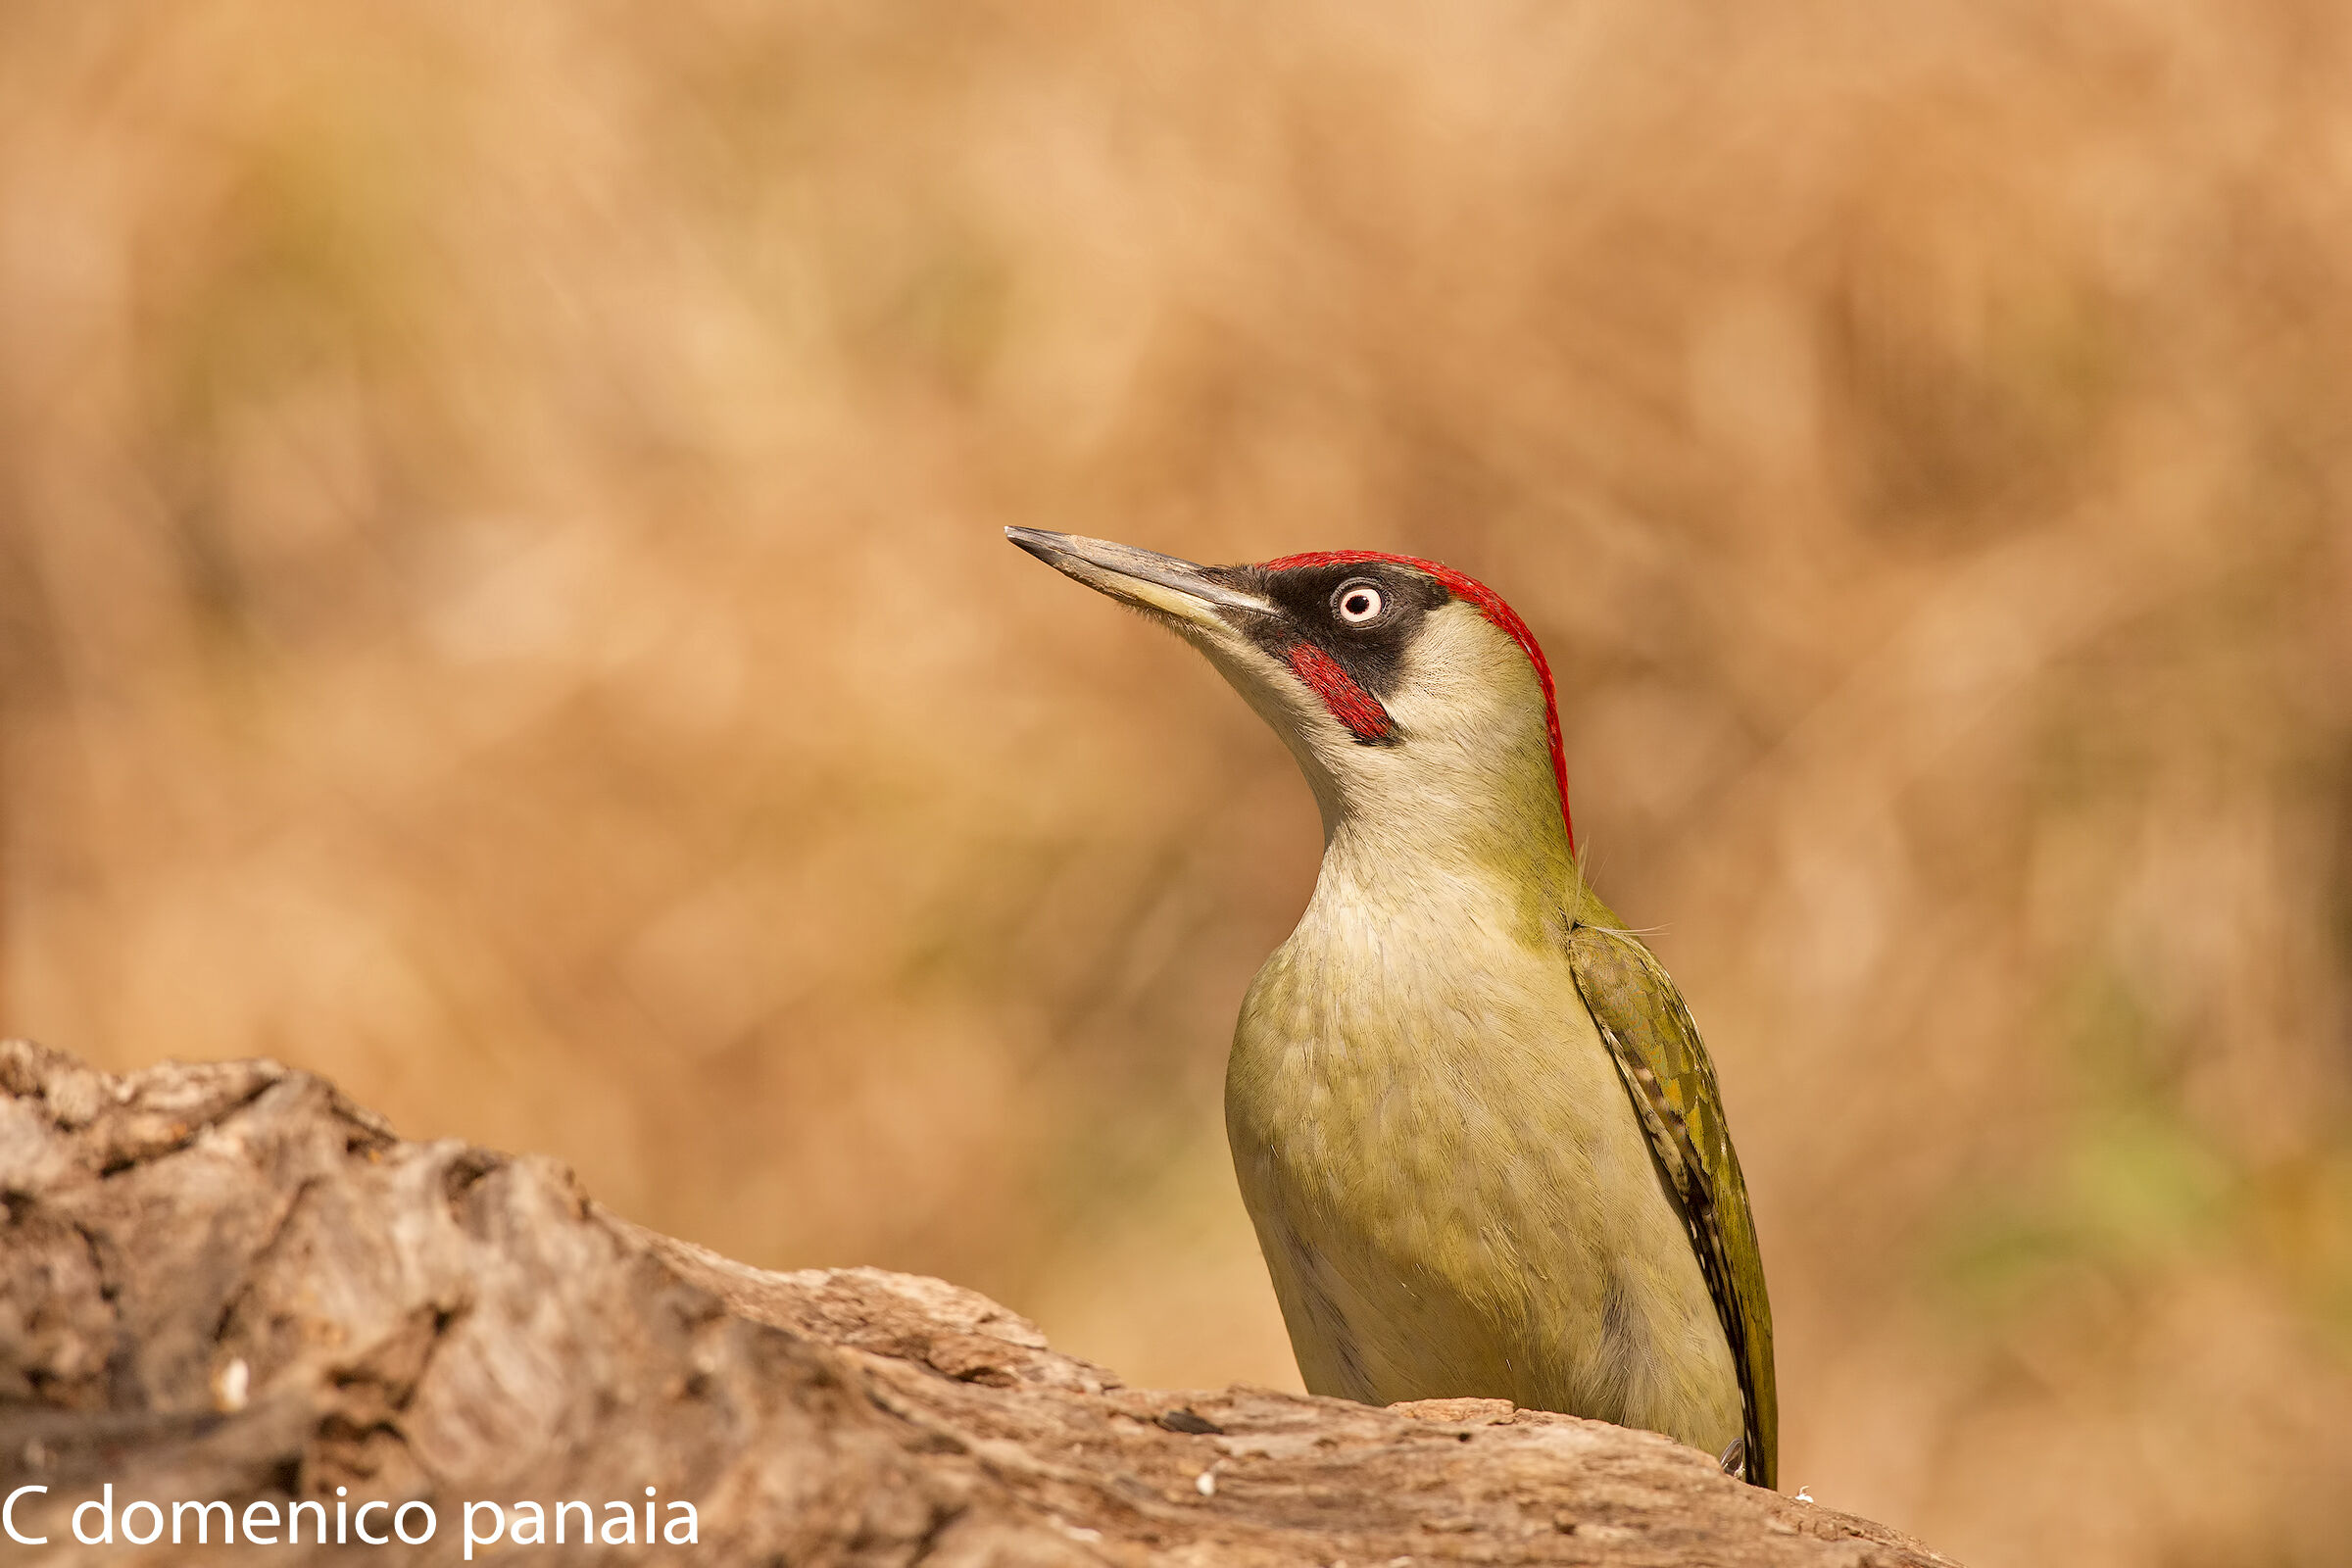 But how beautiful the green woodpeckers...